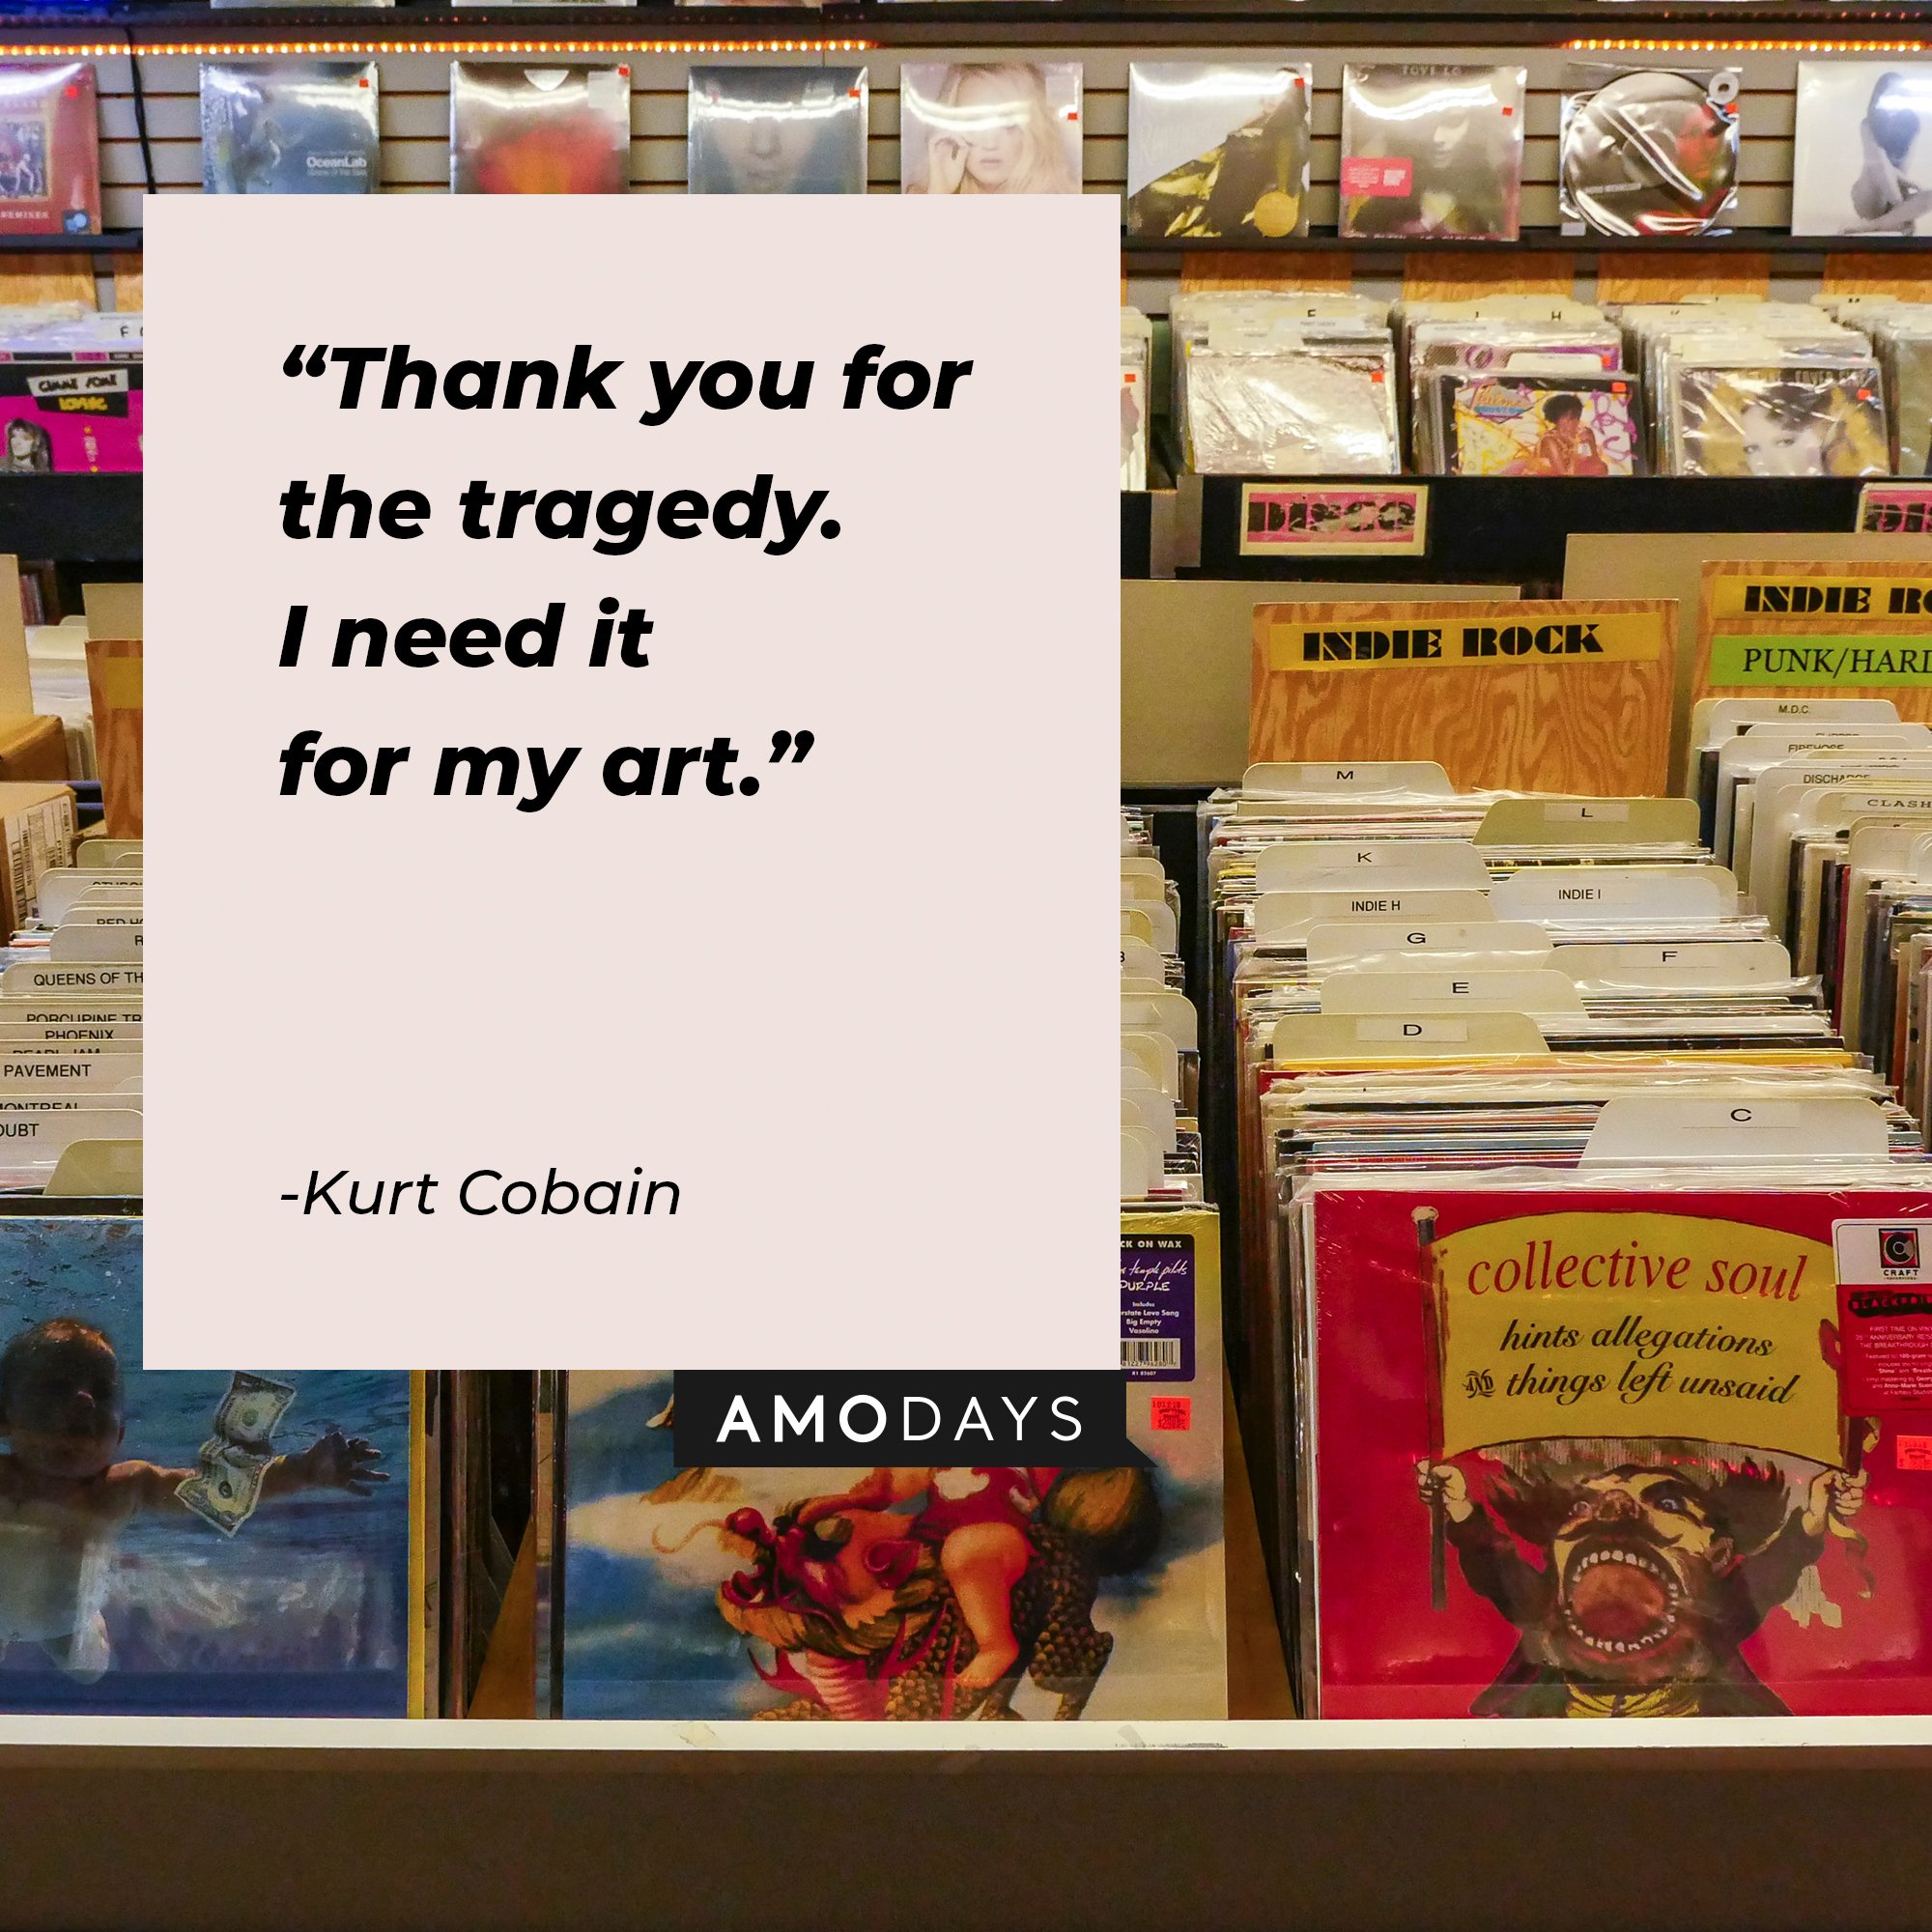 Kurt Cobain's quote: "Thank you for the tragedy. I need it for my art." | Image: AmoDays